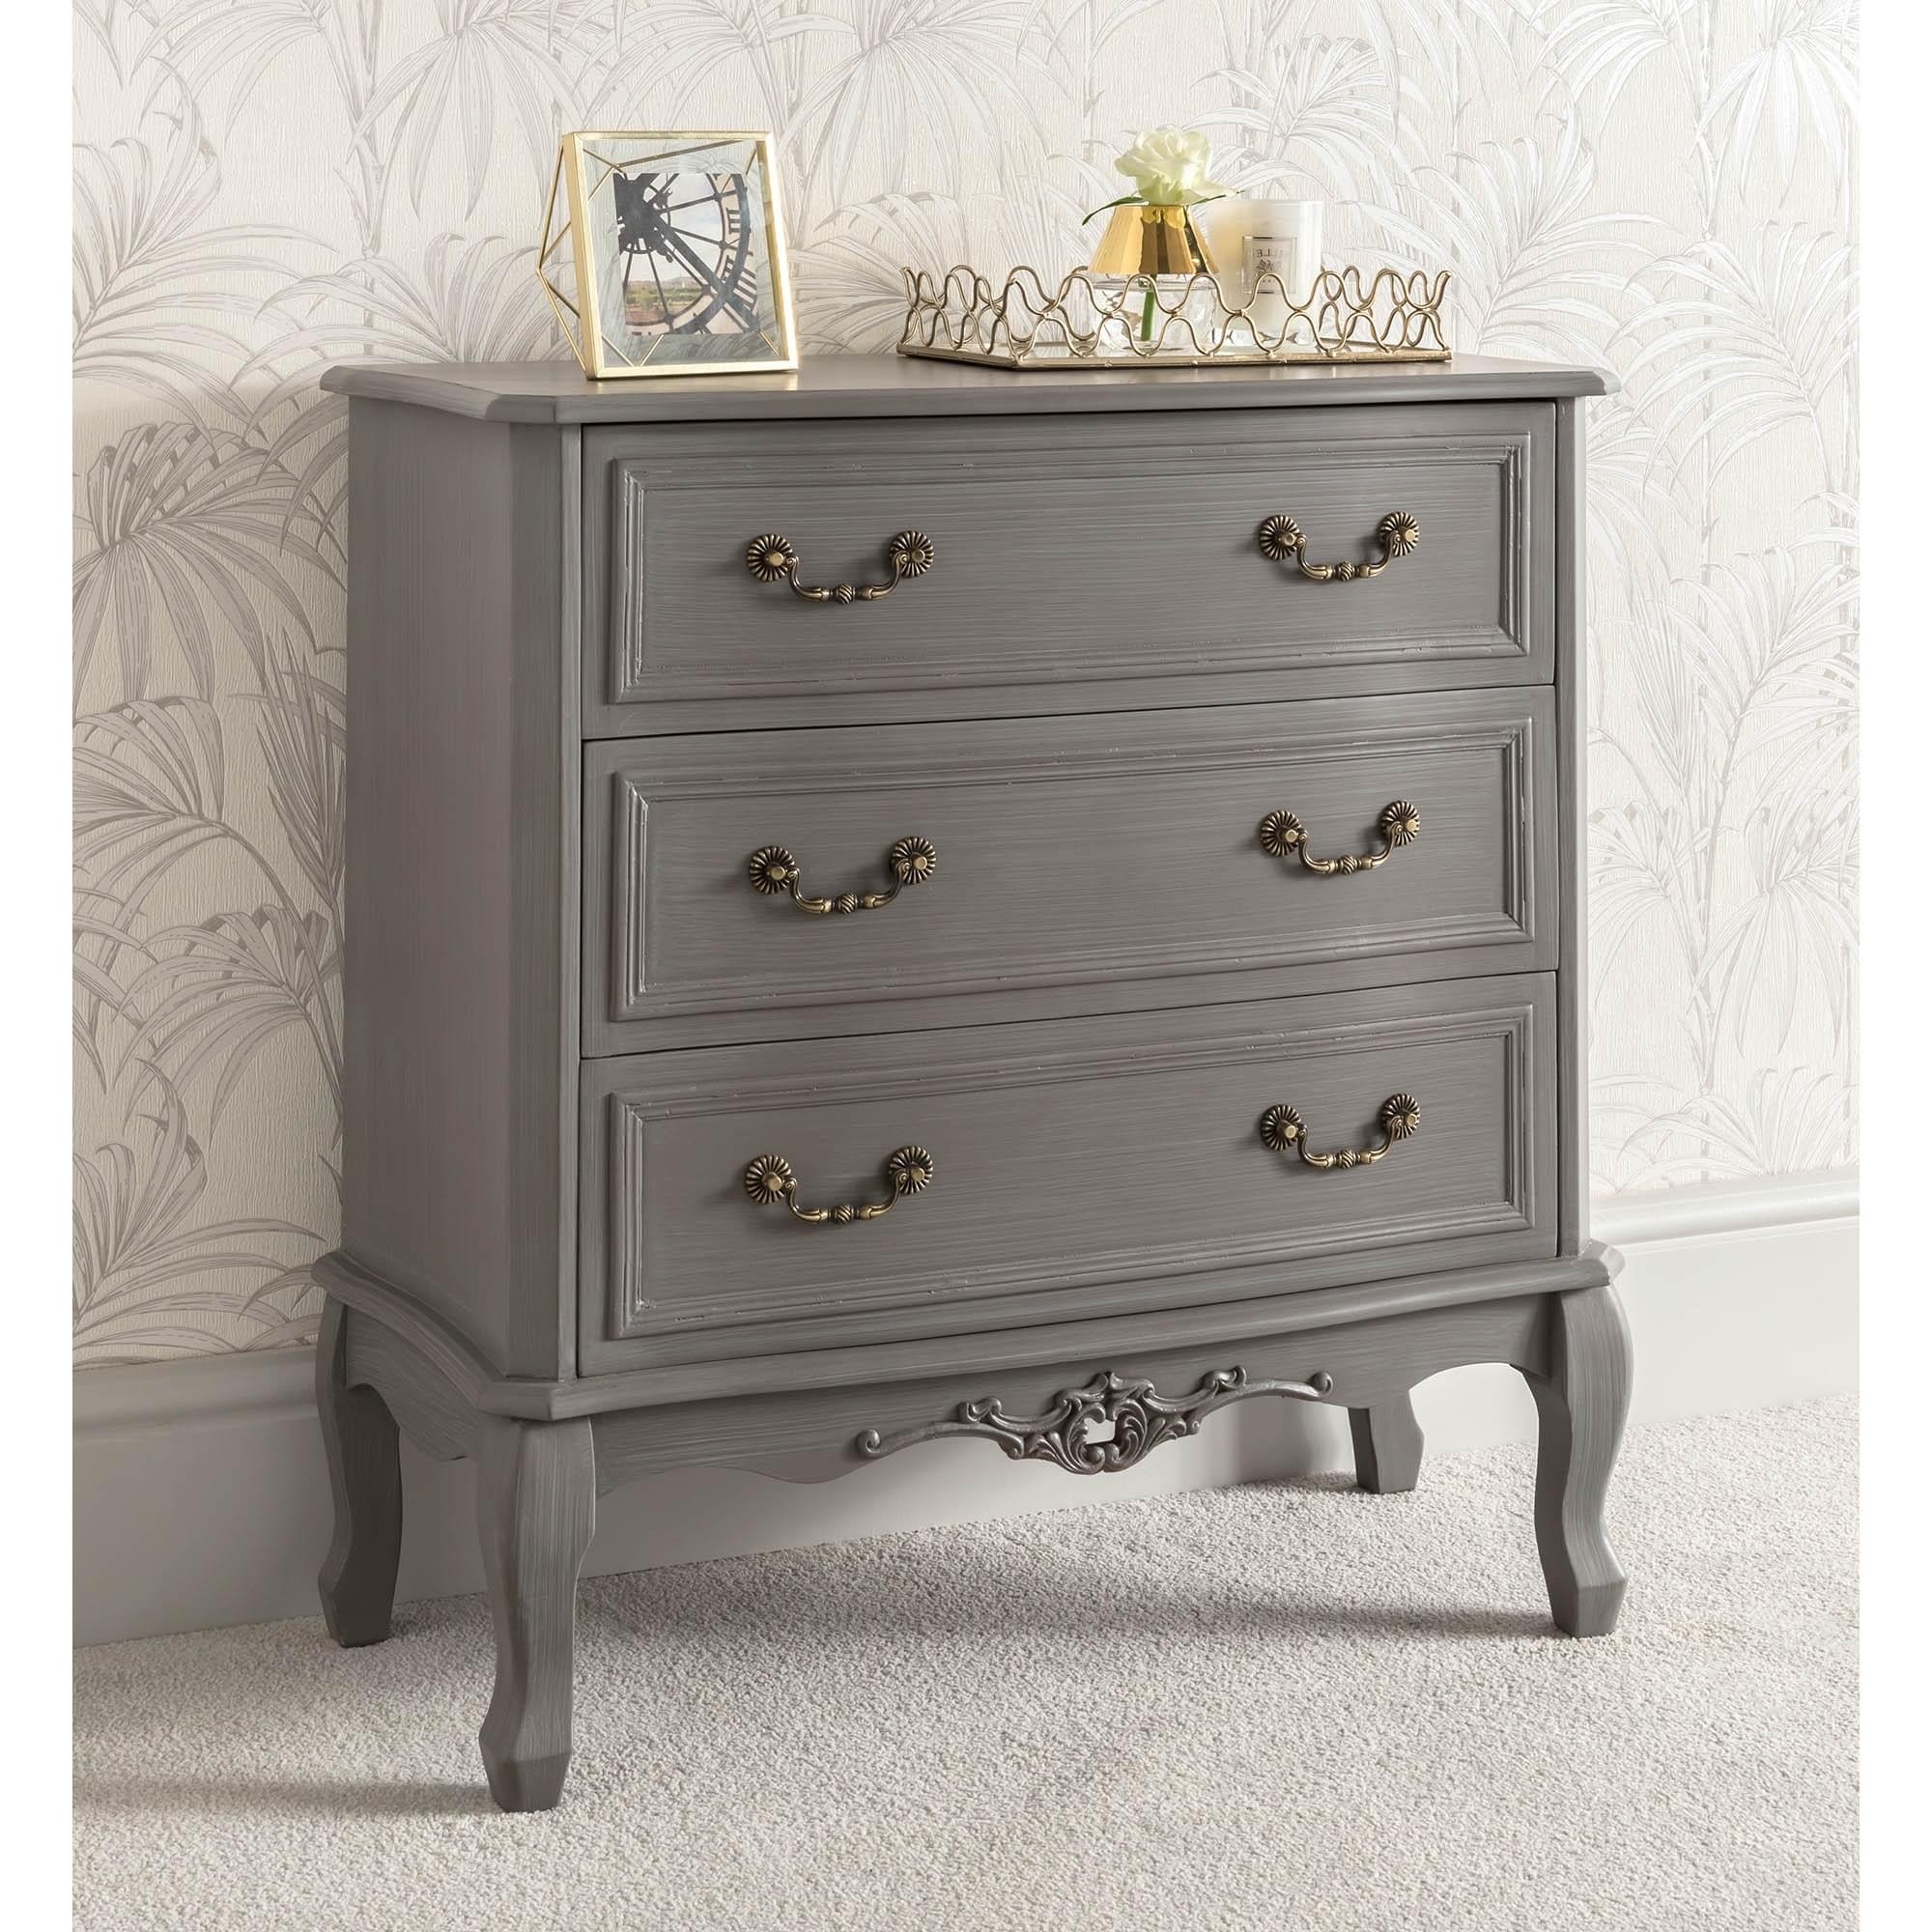 Grey 3 drawer antique french style chest of drawers